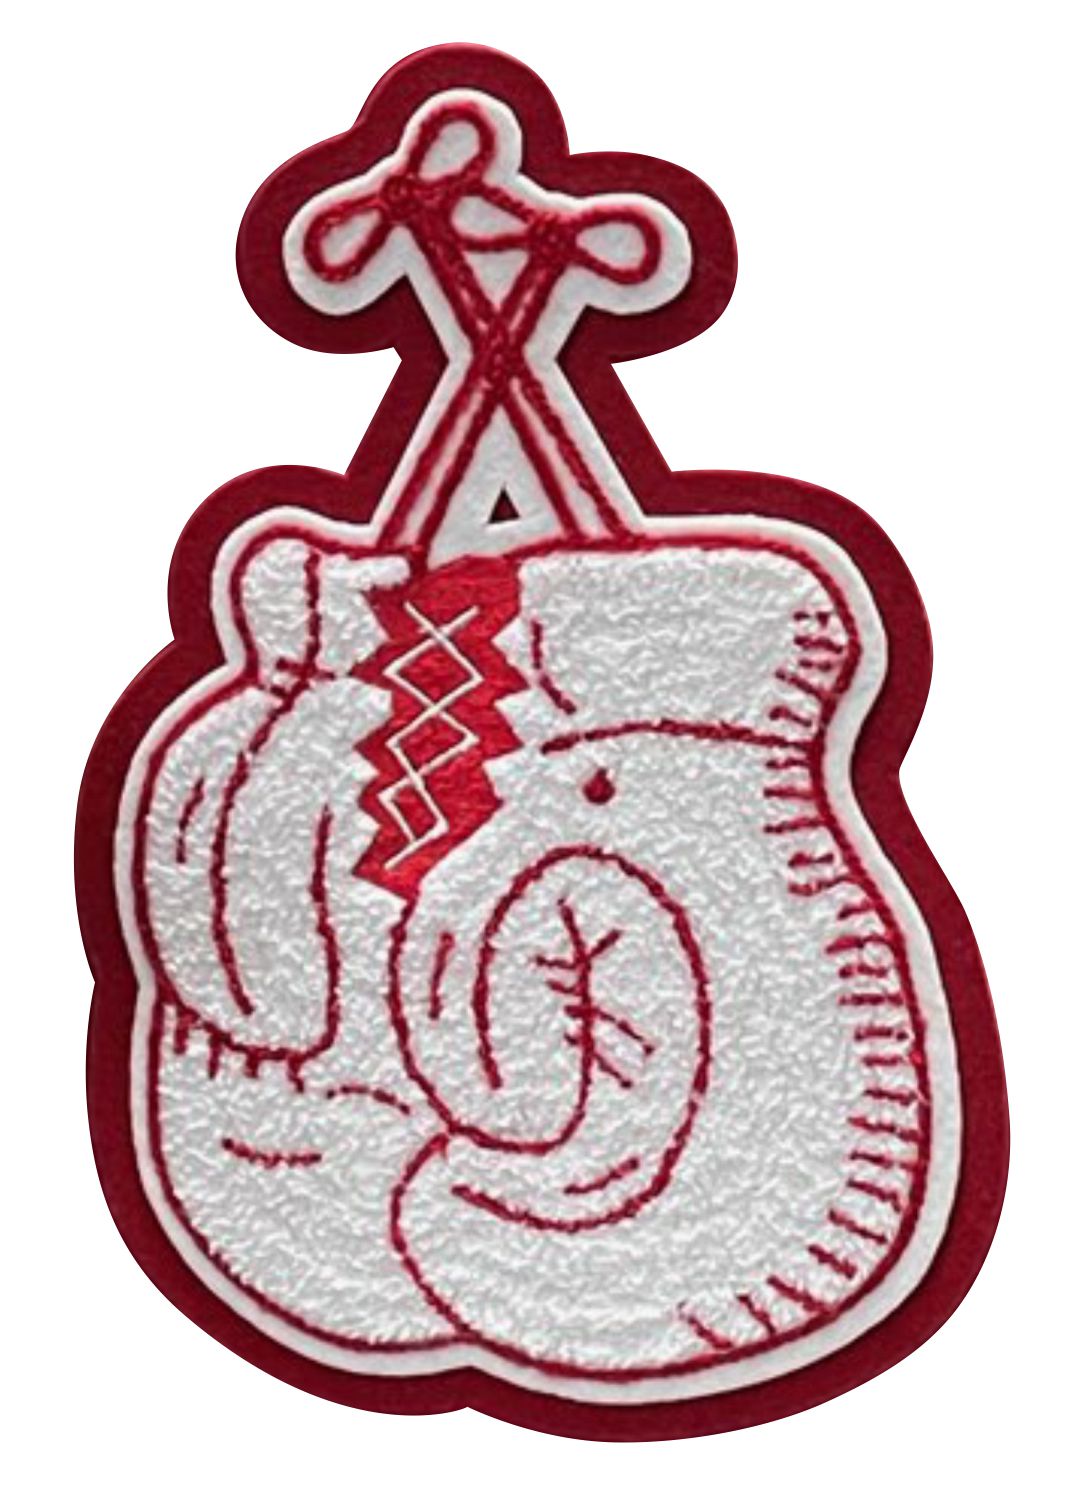 Chenille Boxing Glove with Strings - letterman jacket patch